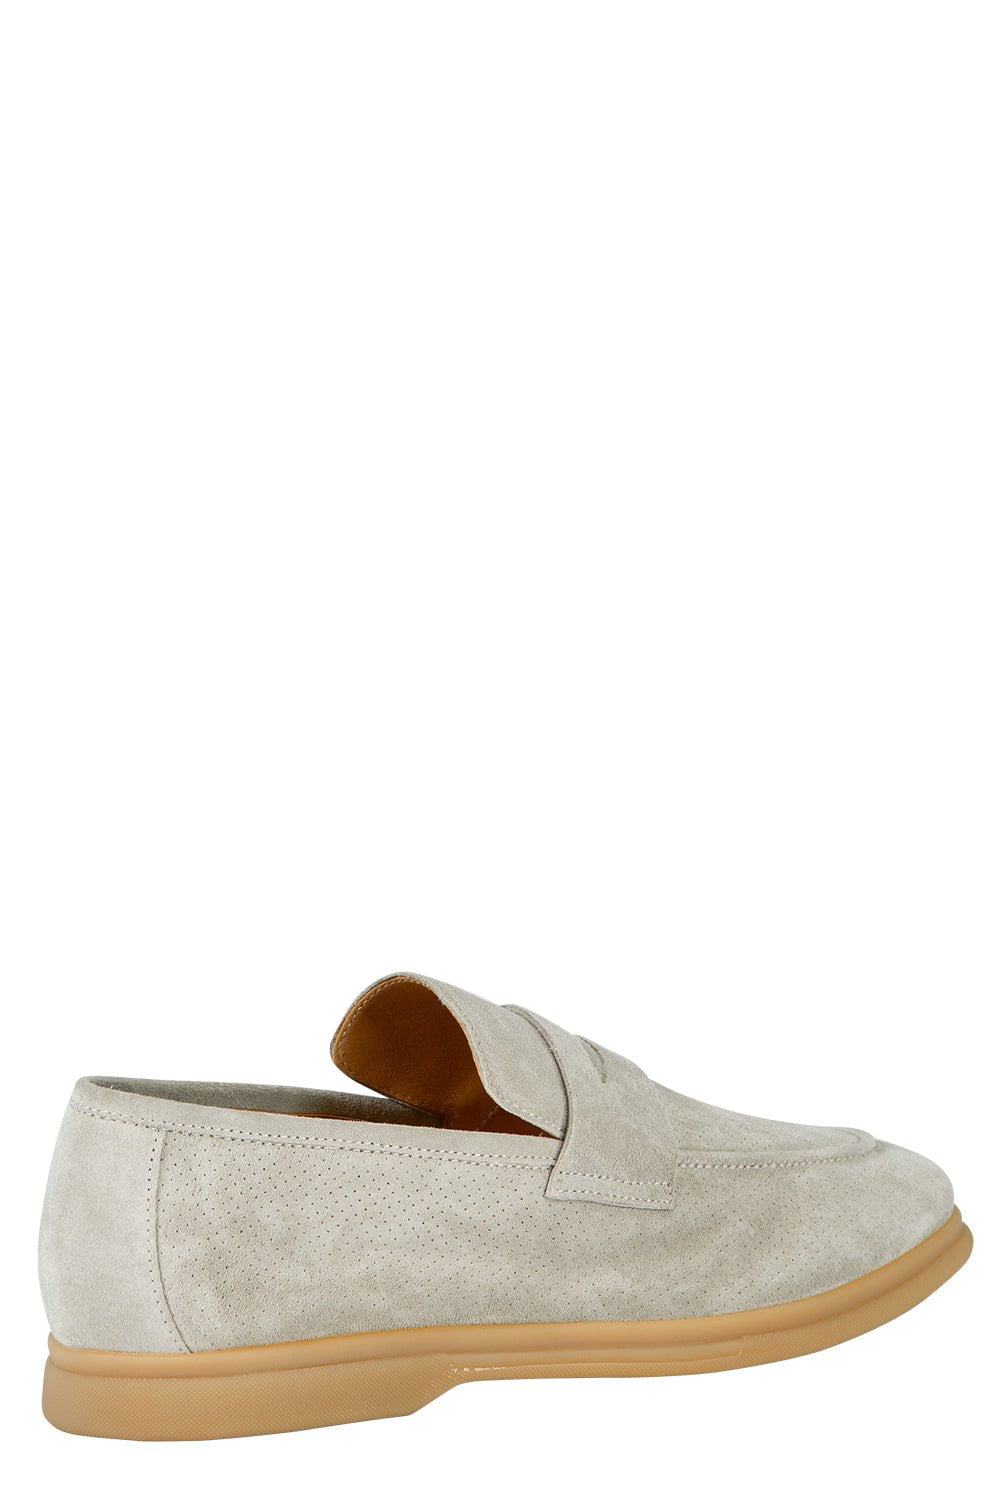 ELEVENTY-Suede Loafer - Military-